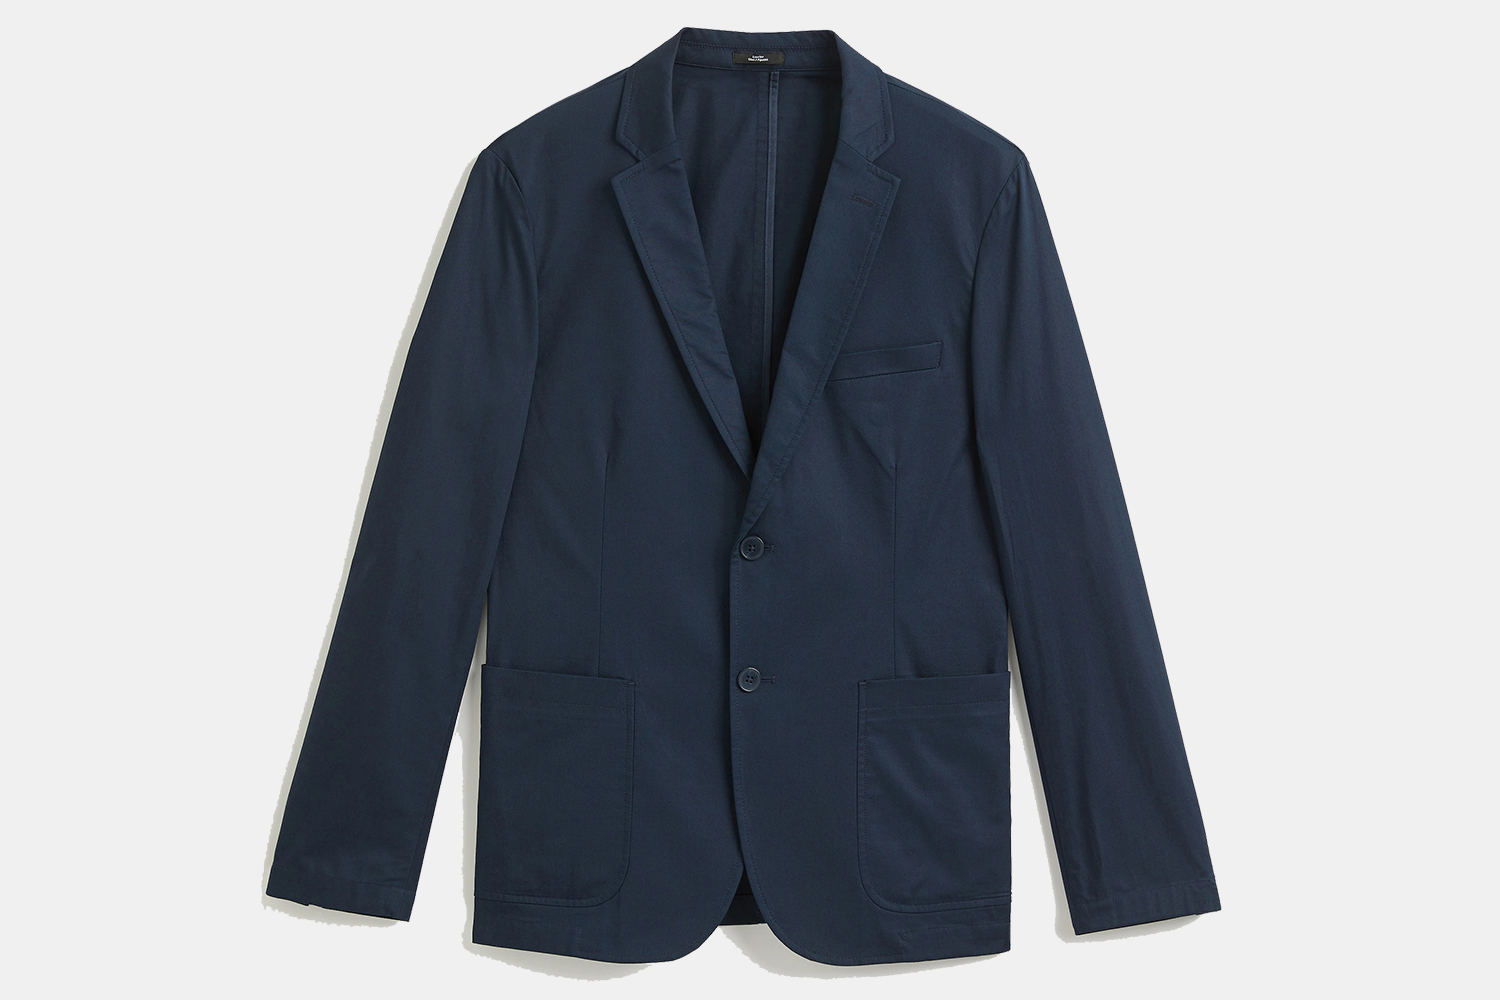 Frank And Oak Men's The Laurier Cotton Blazer in Navy Discount